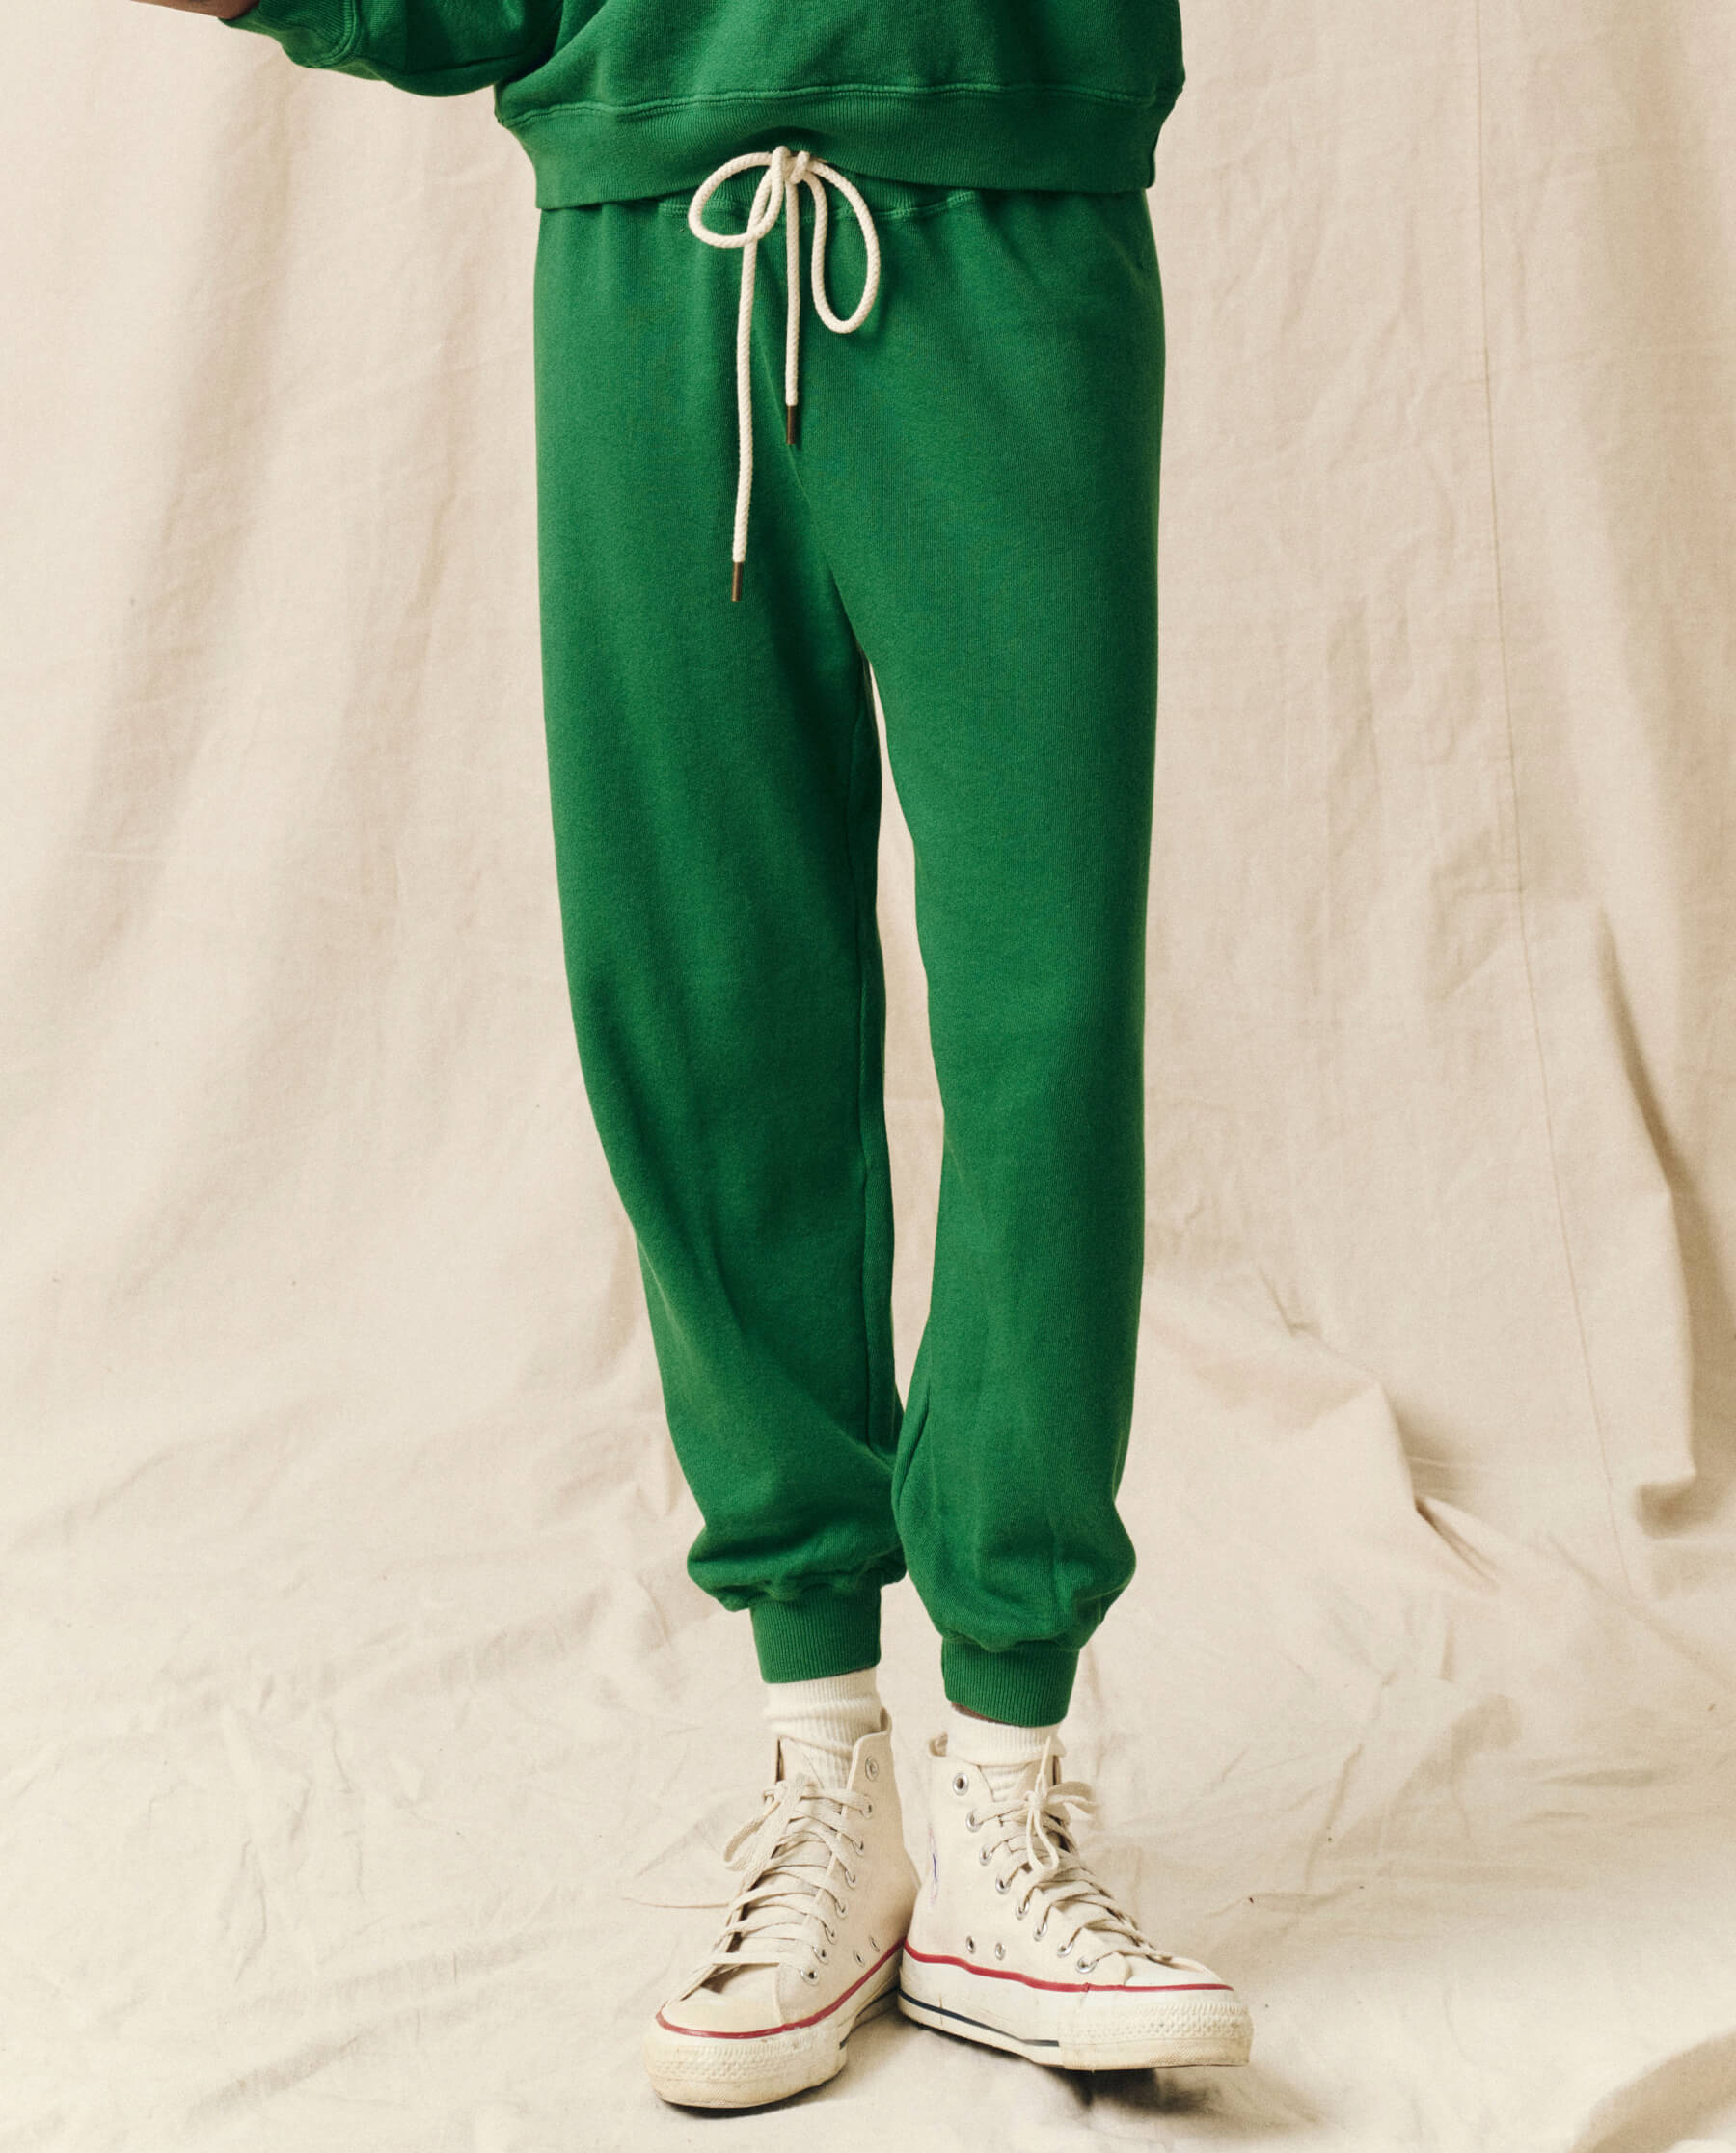 The Cropped Sweatpant. Solid -- Holly Leaf SWEATPANTS THE GREAT. HOL 23 KNITS